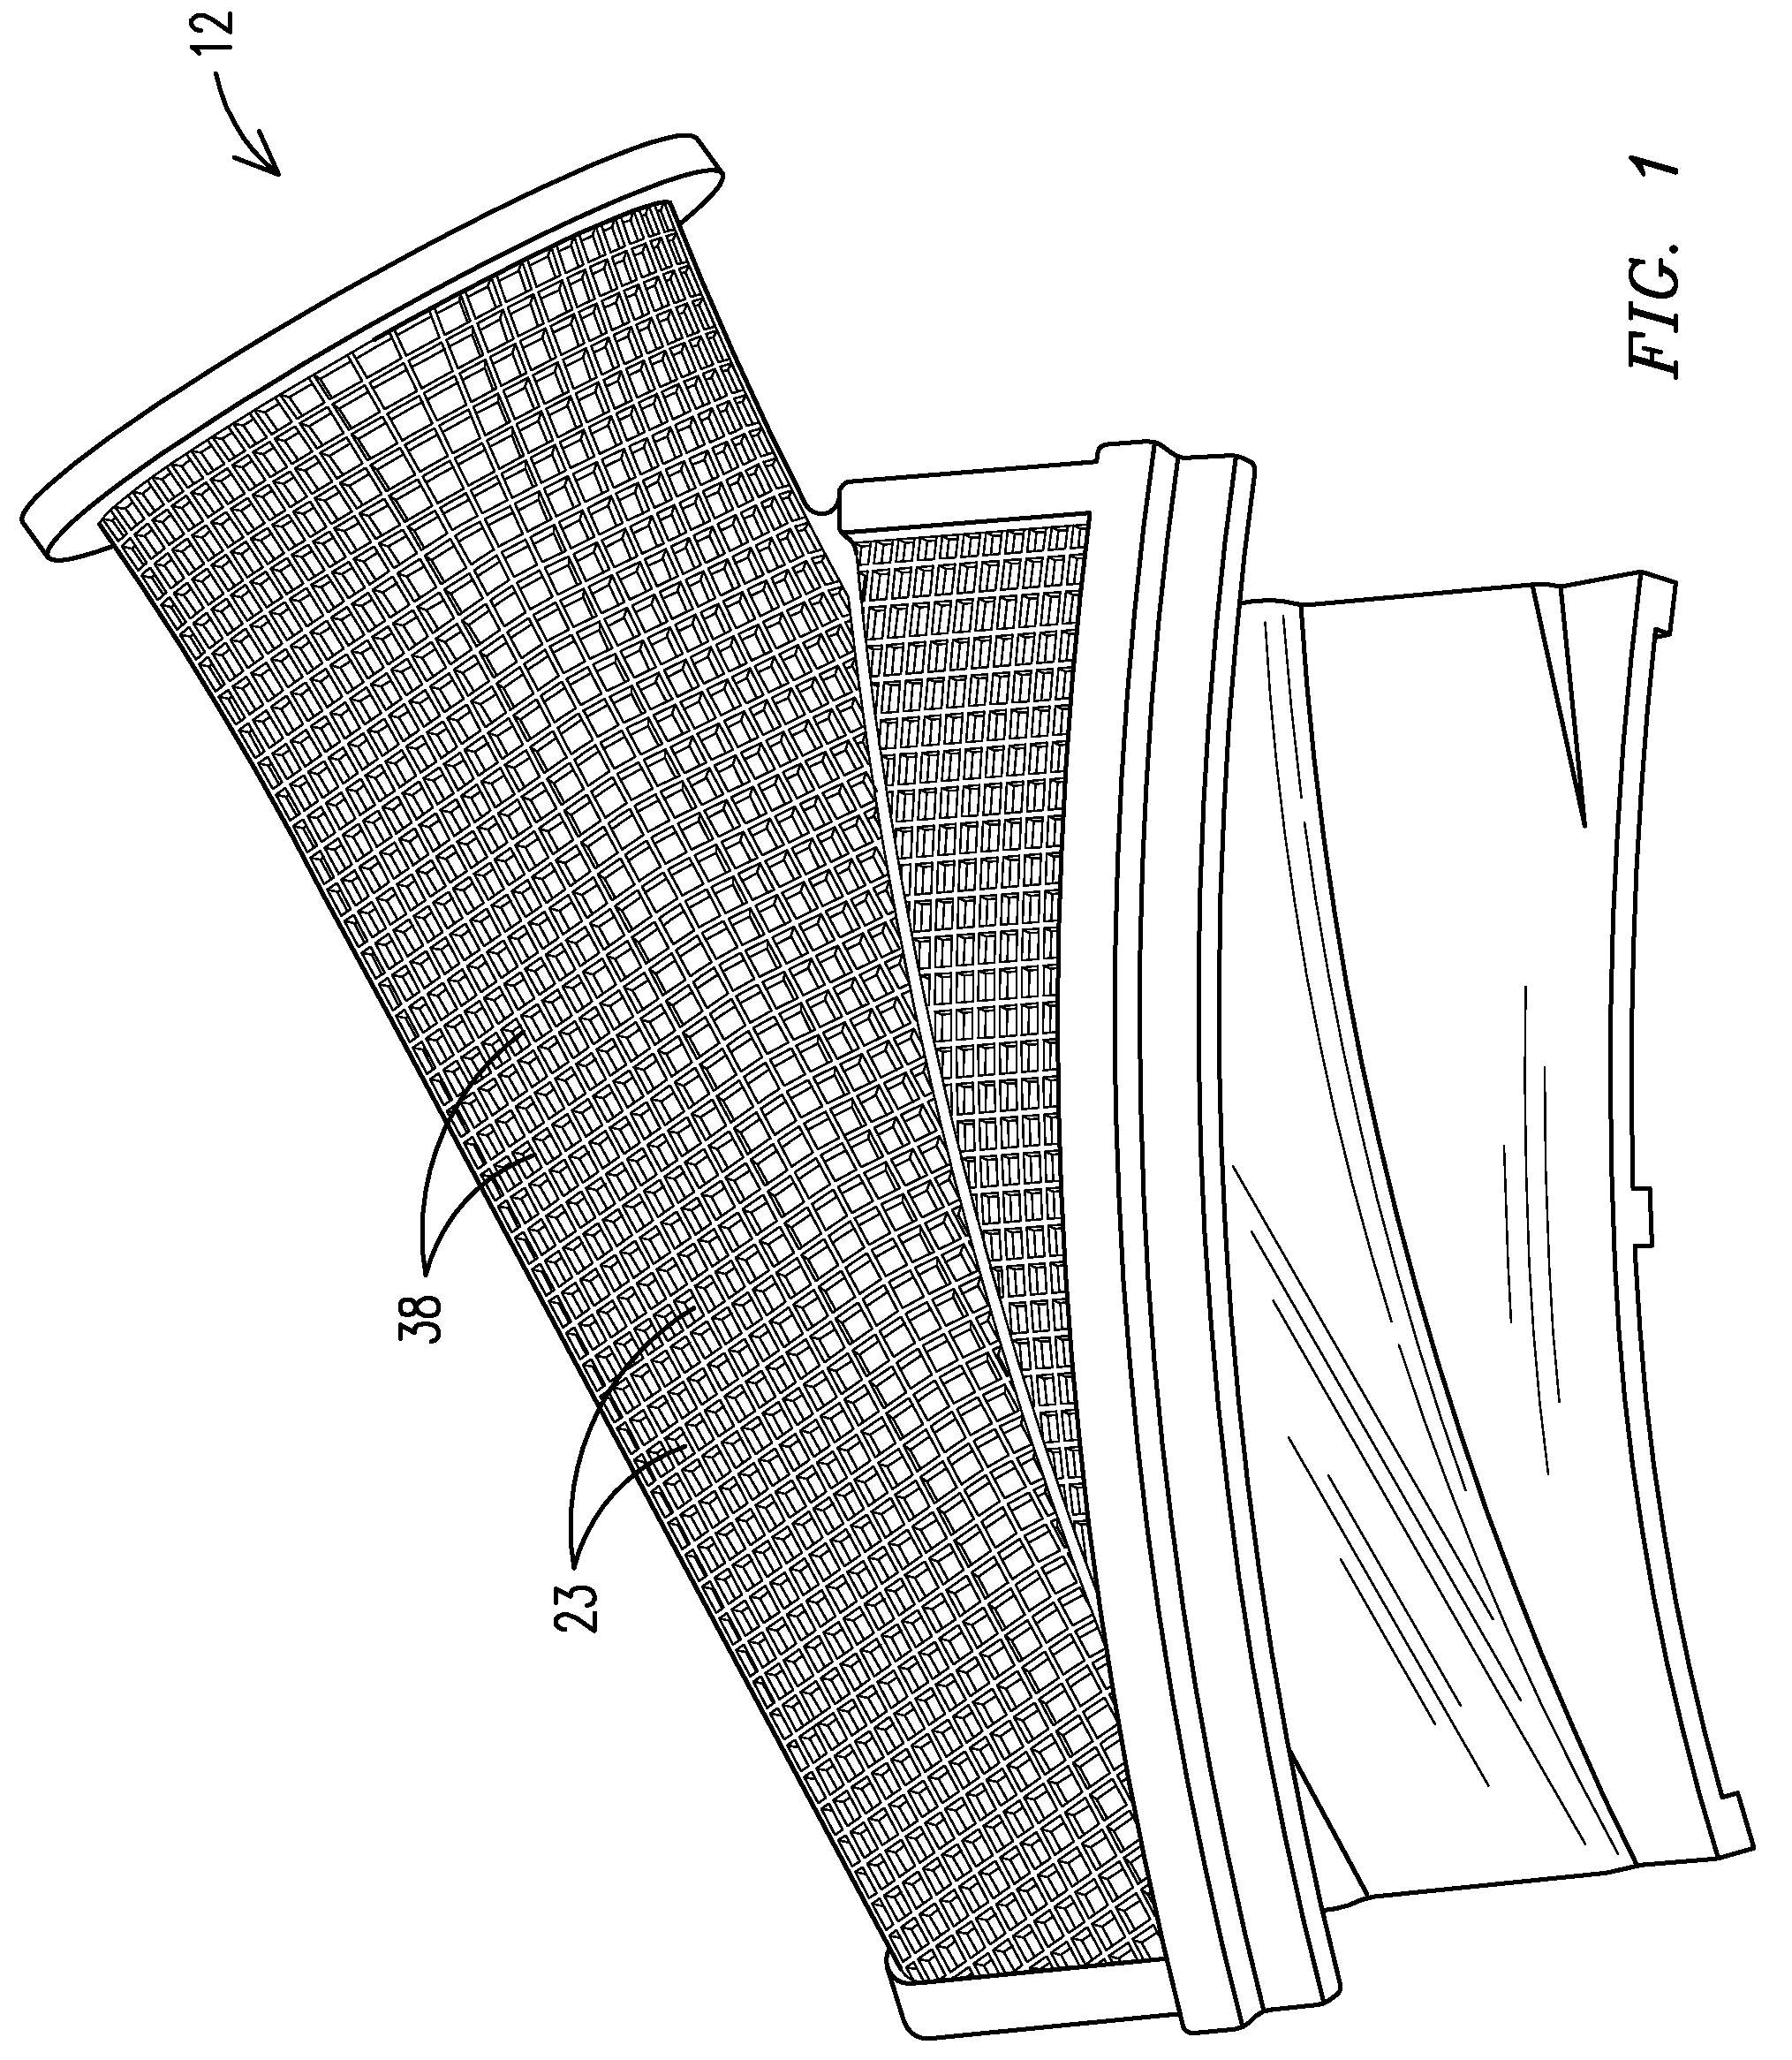 Method of fabricating a nearwall nozzle impingement cooled component for an internal combustion engine